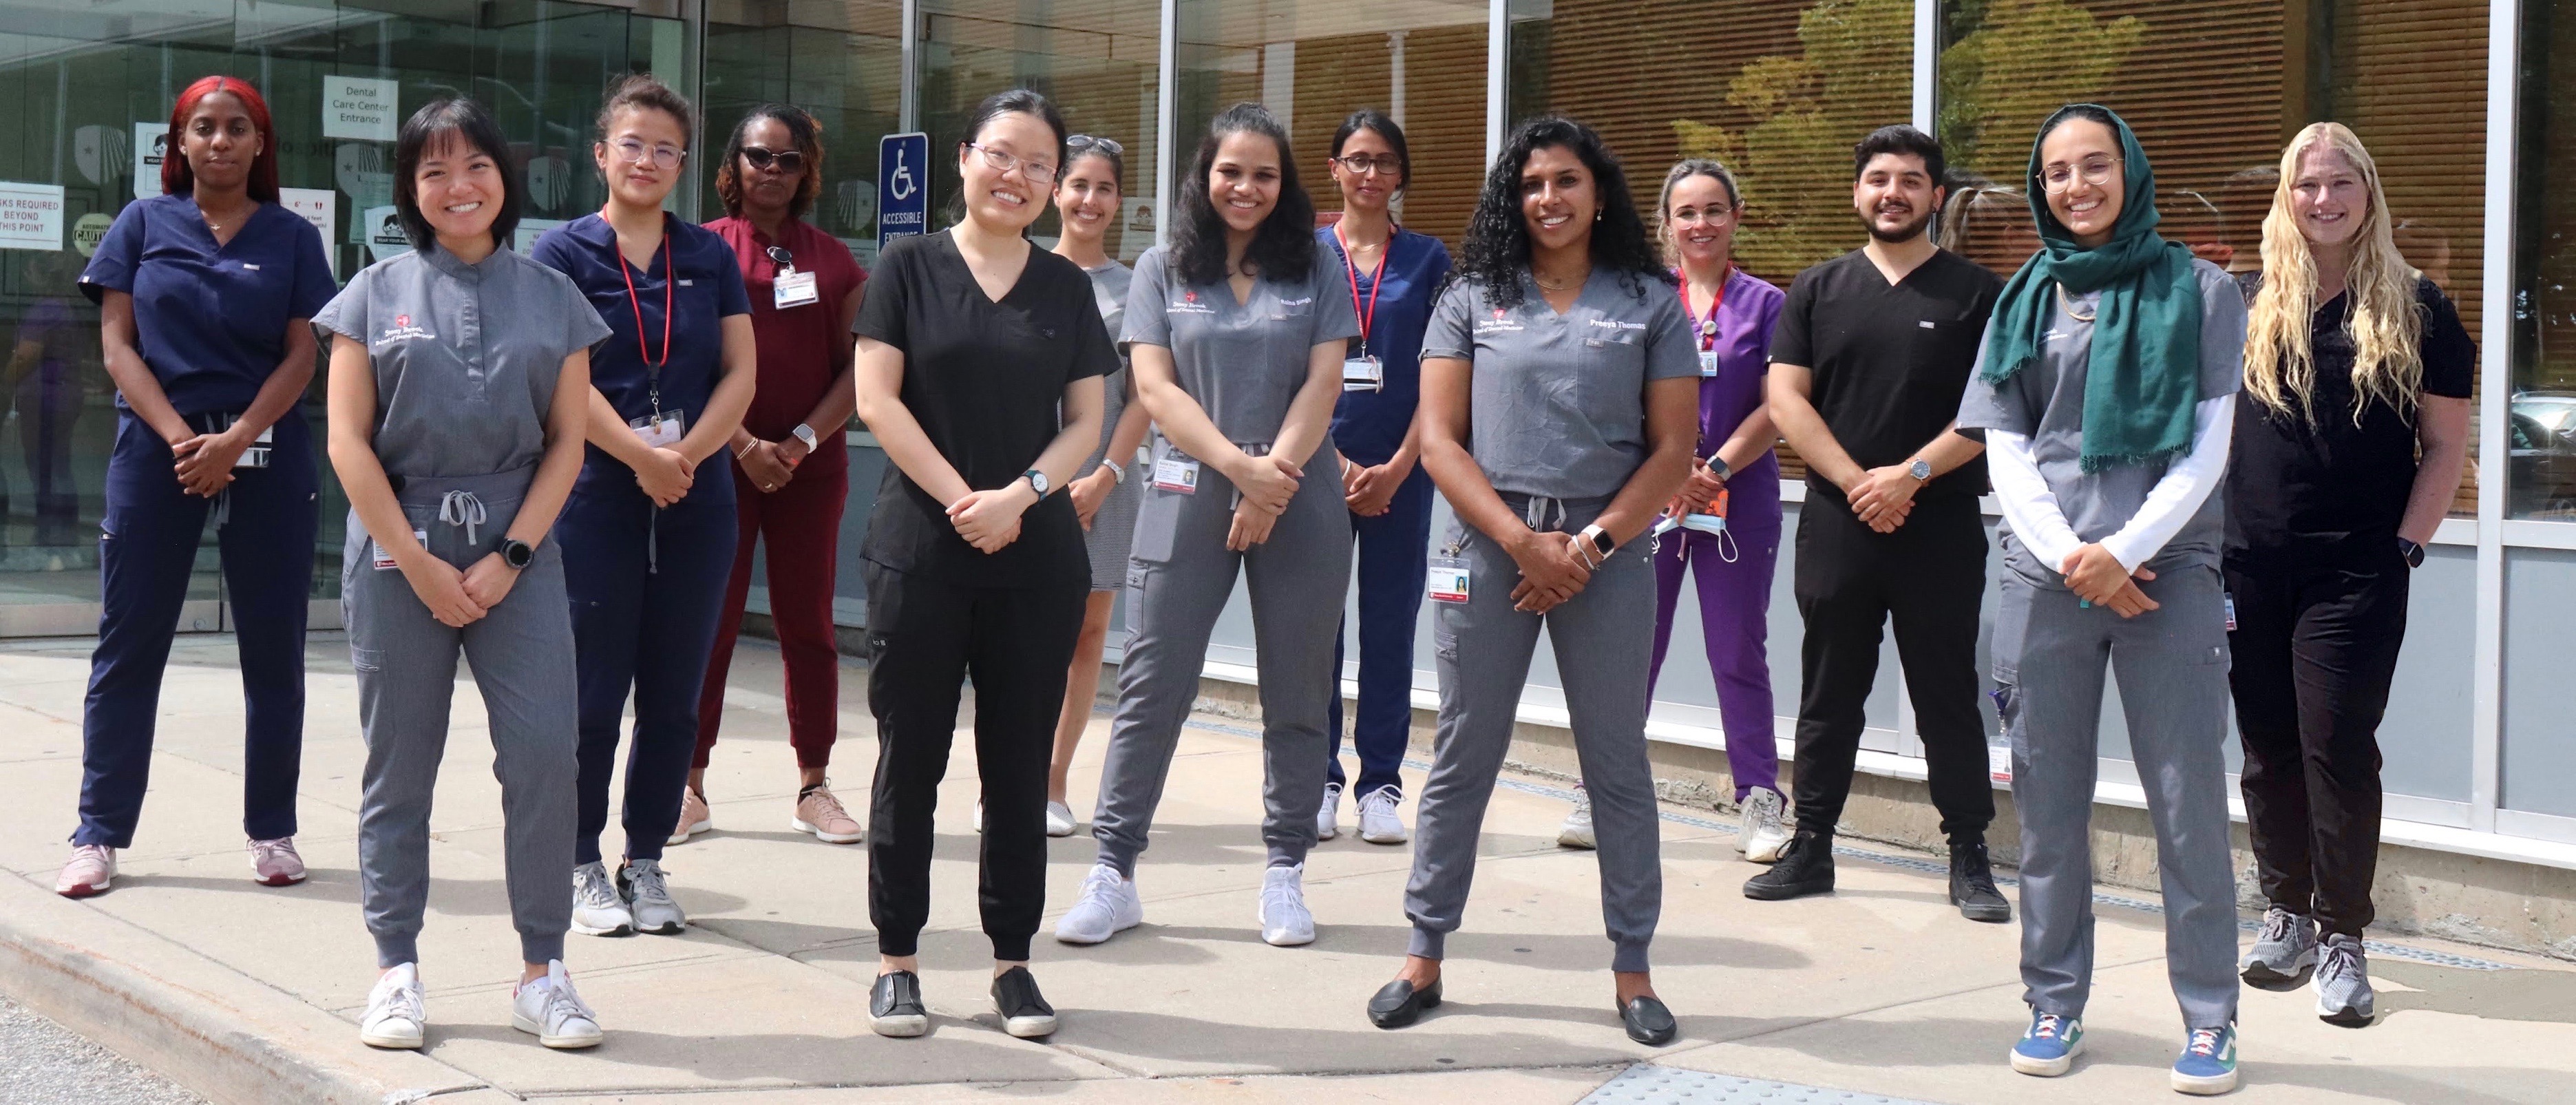 Stony Brook University School of Dental Medicine's Students Act for Equity (SAFE) Subcommittee